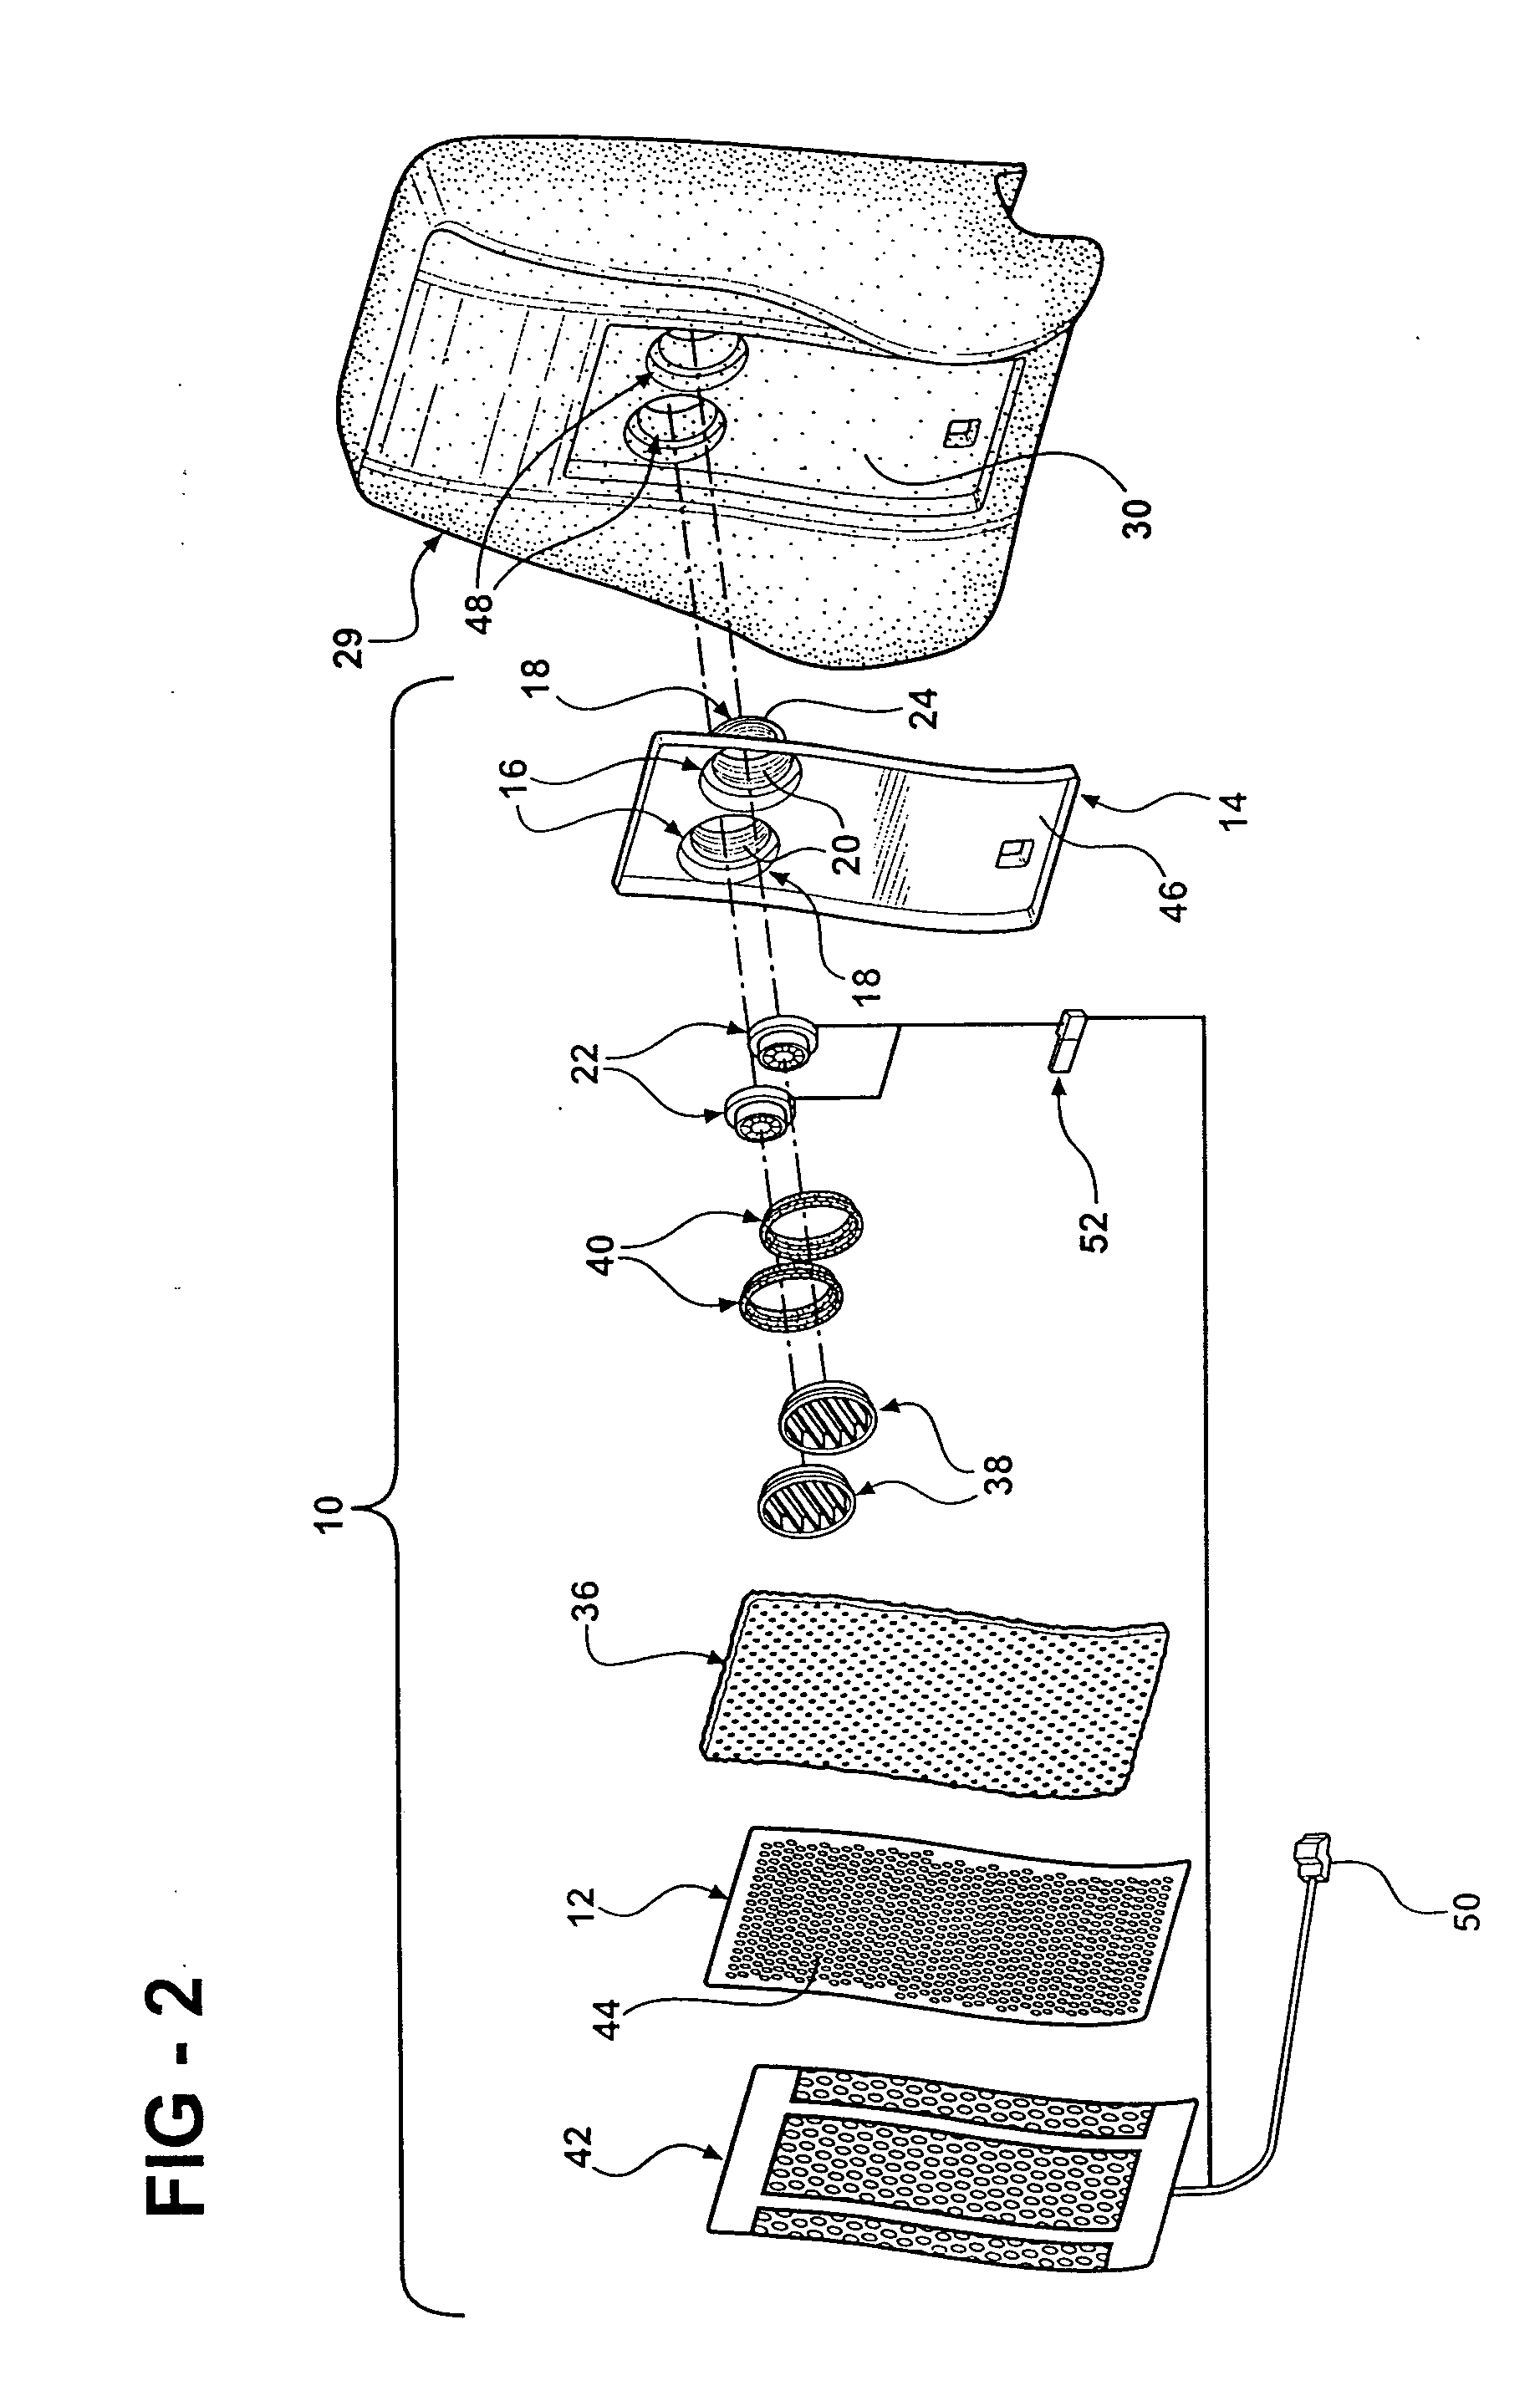 Modular comfort assembly diffuser bag having integral air mover support